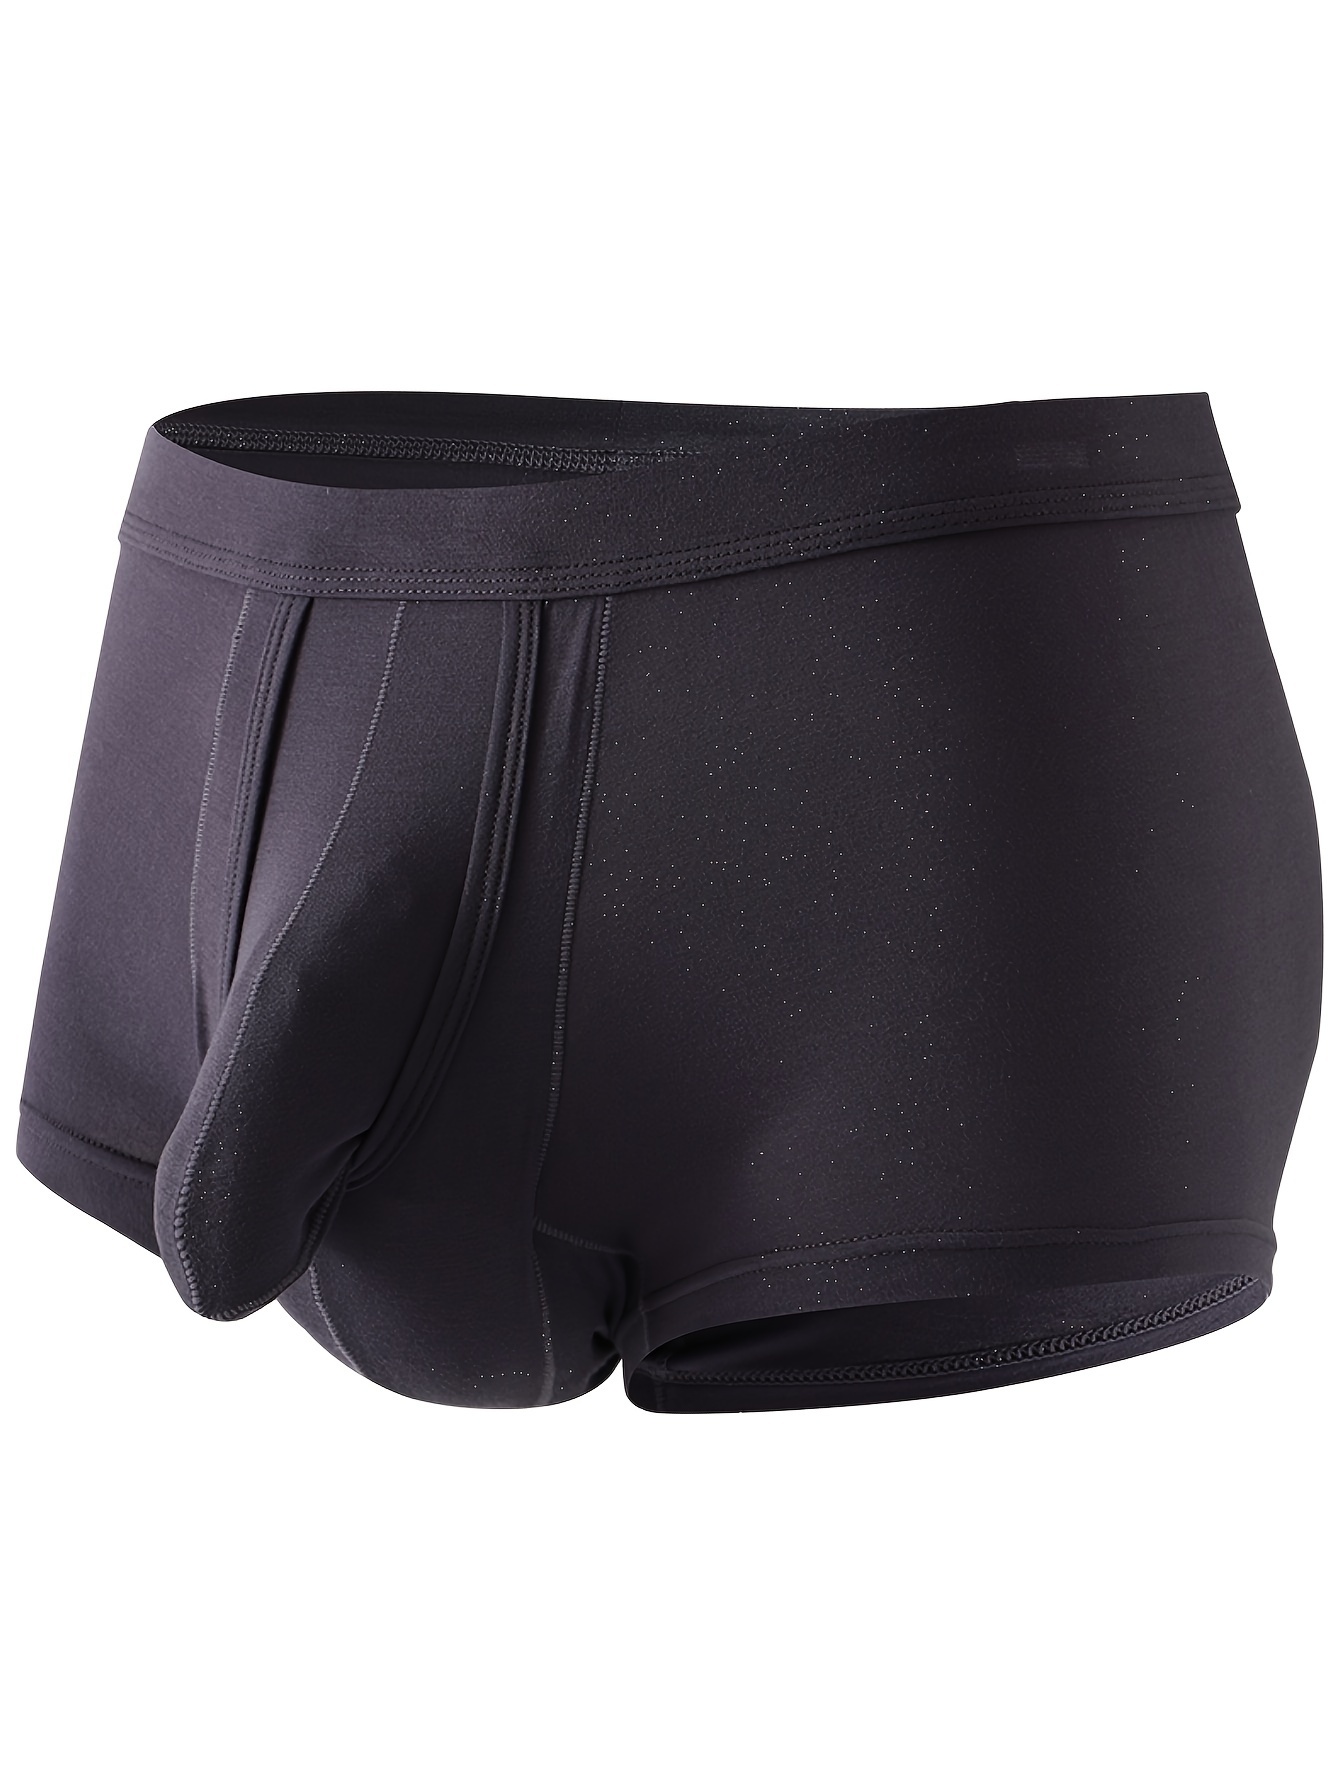 Buy Pouch Boxer Briefs for Men With Separating Layer Inside / Mens